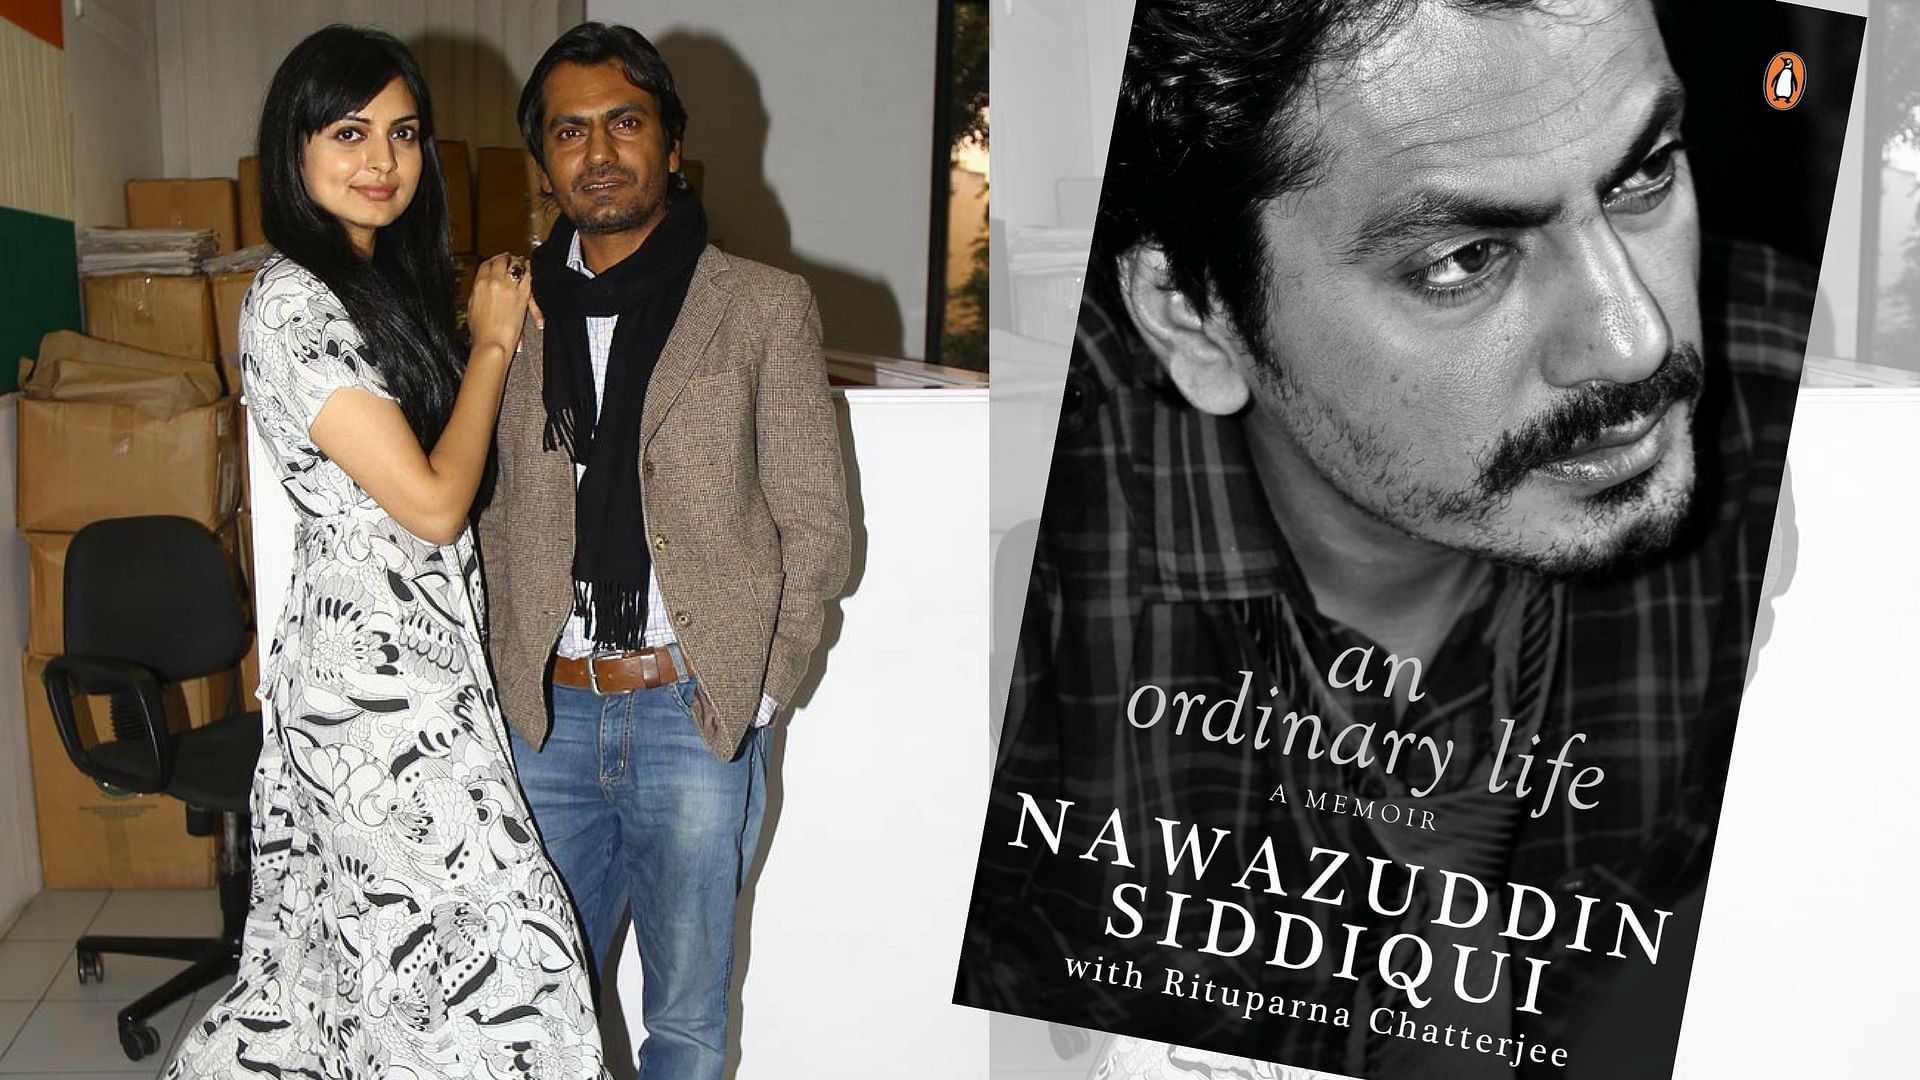 Nawazuddin Siddiqui opens up about his relationships in his memoir.